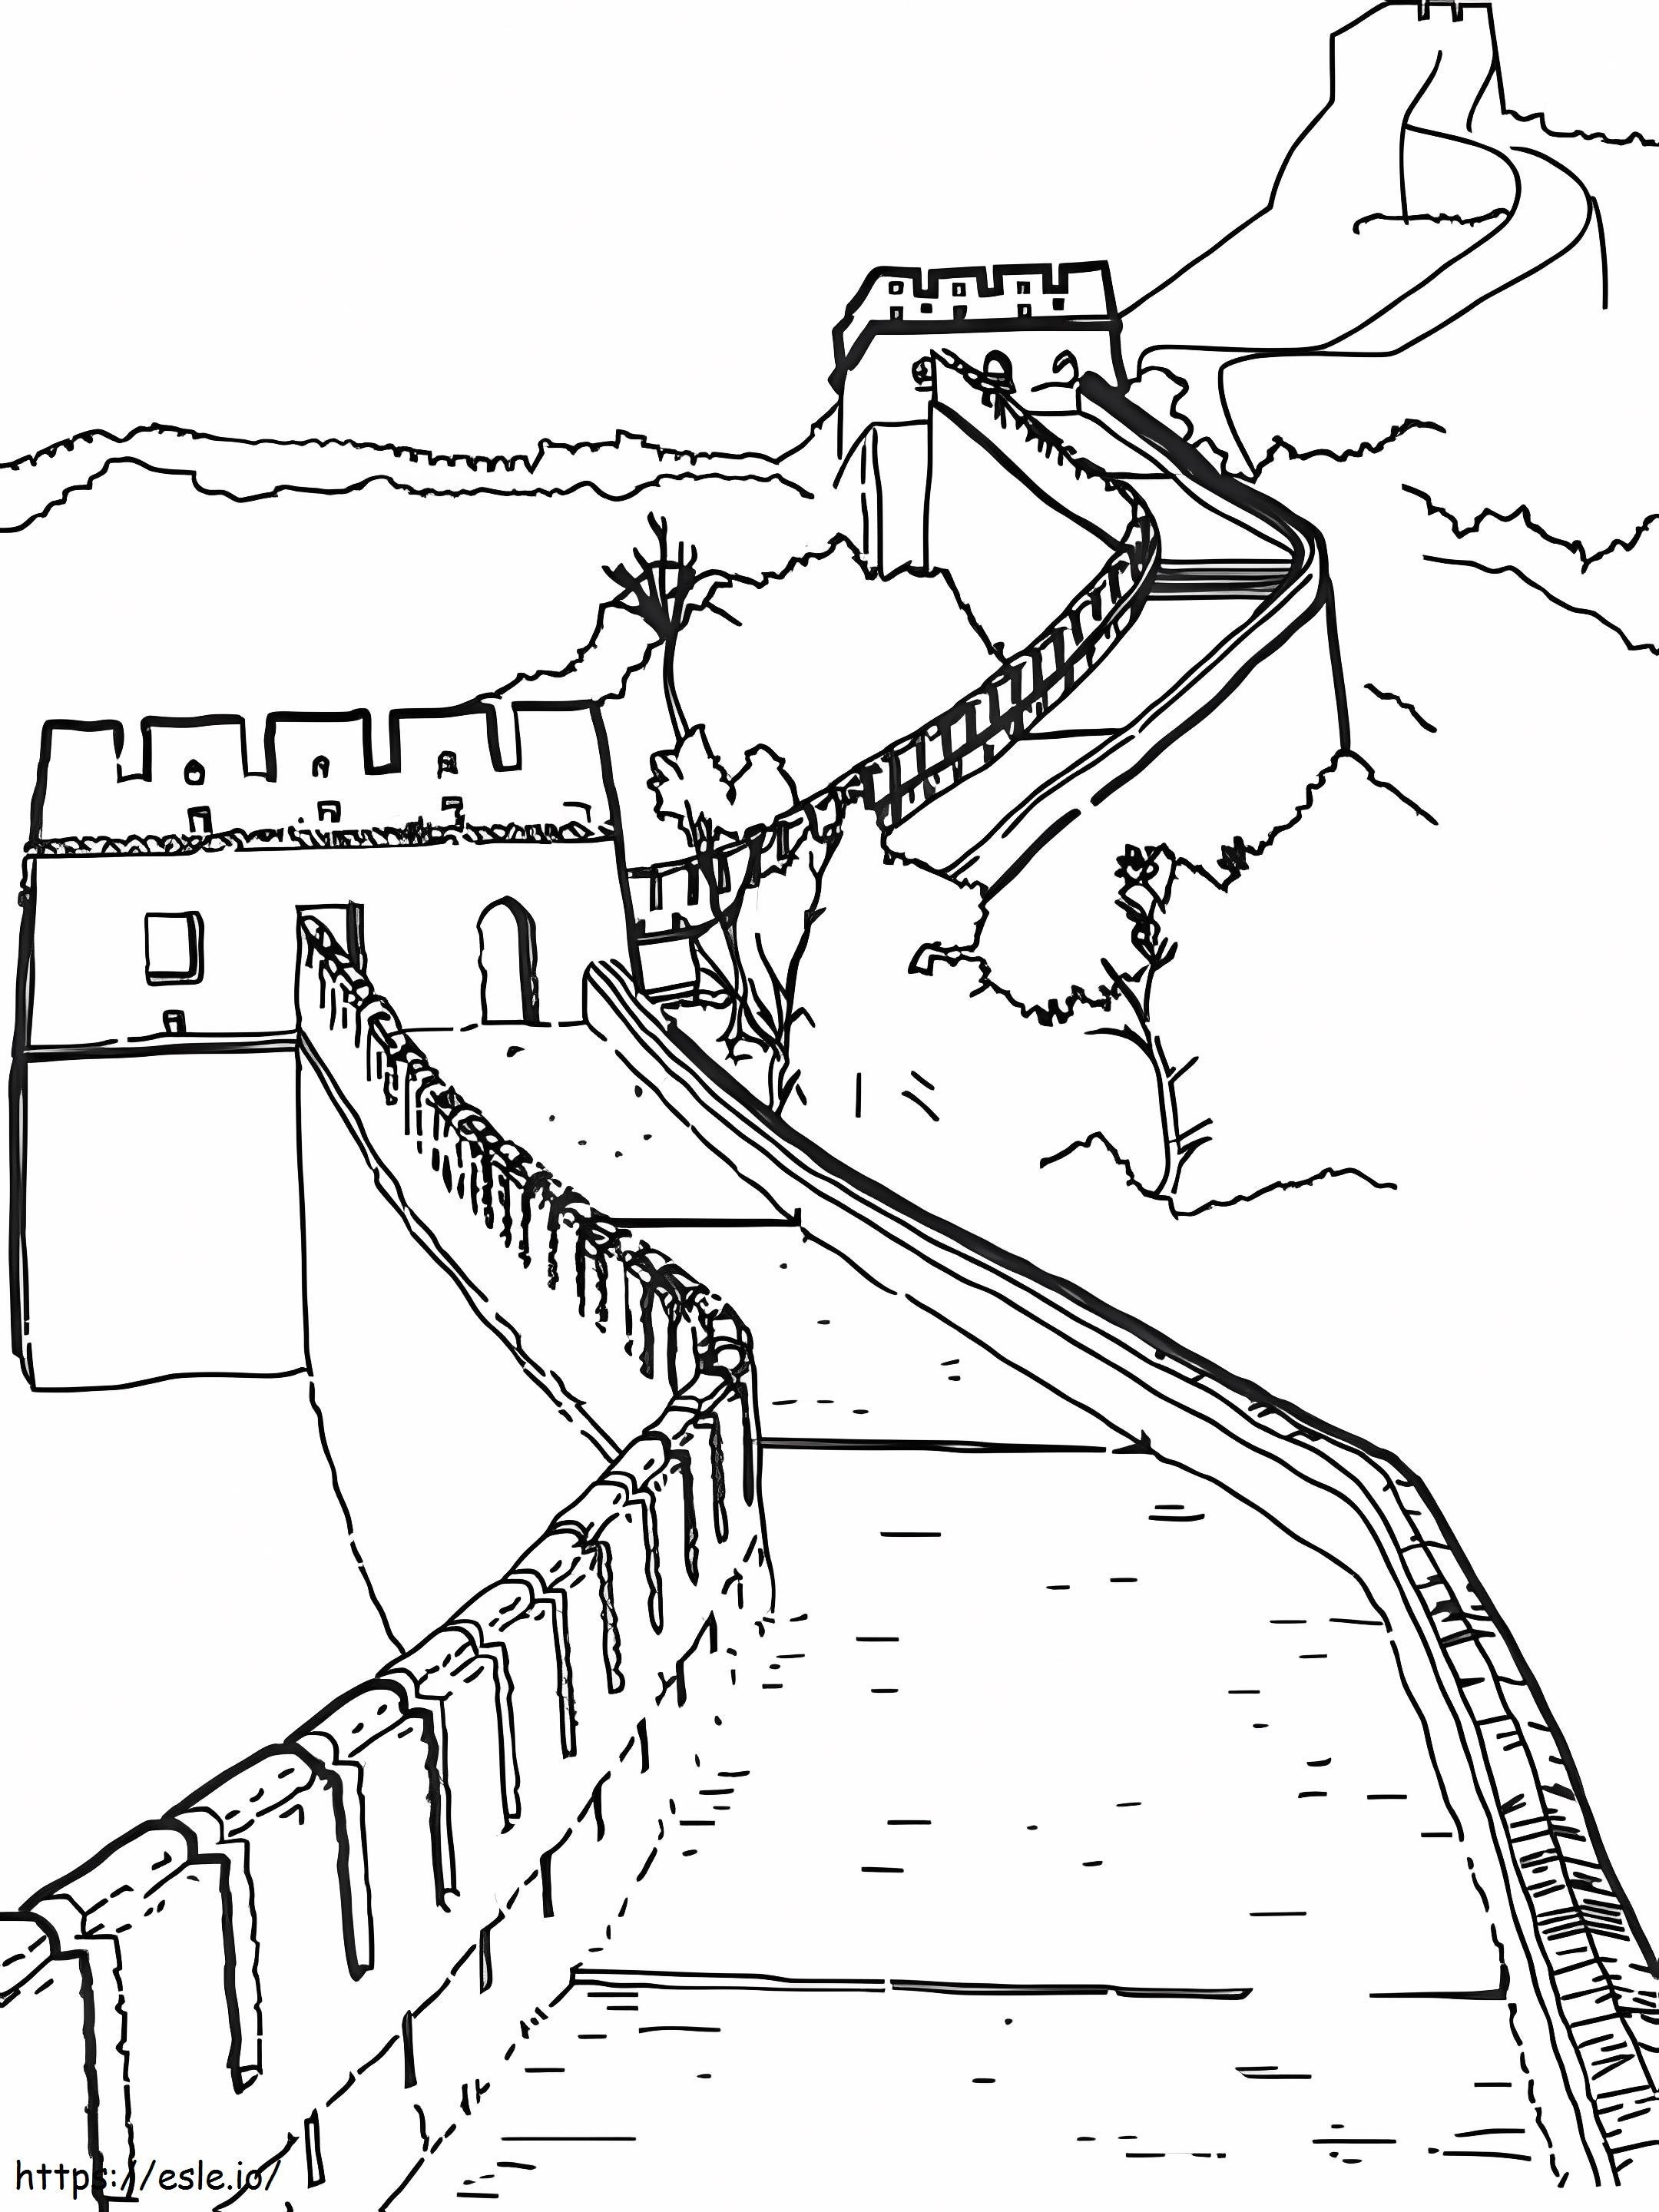 The Great Wall Of China coloring page